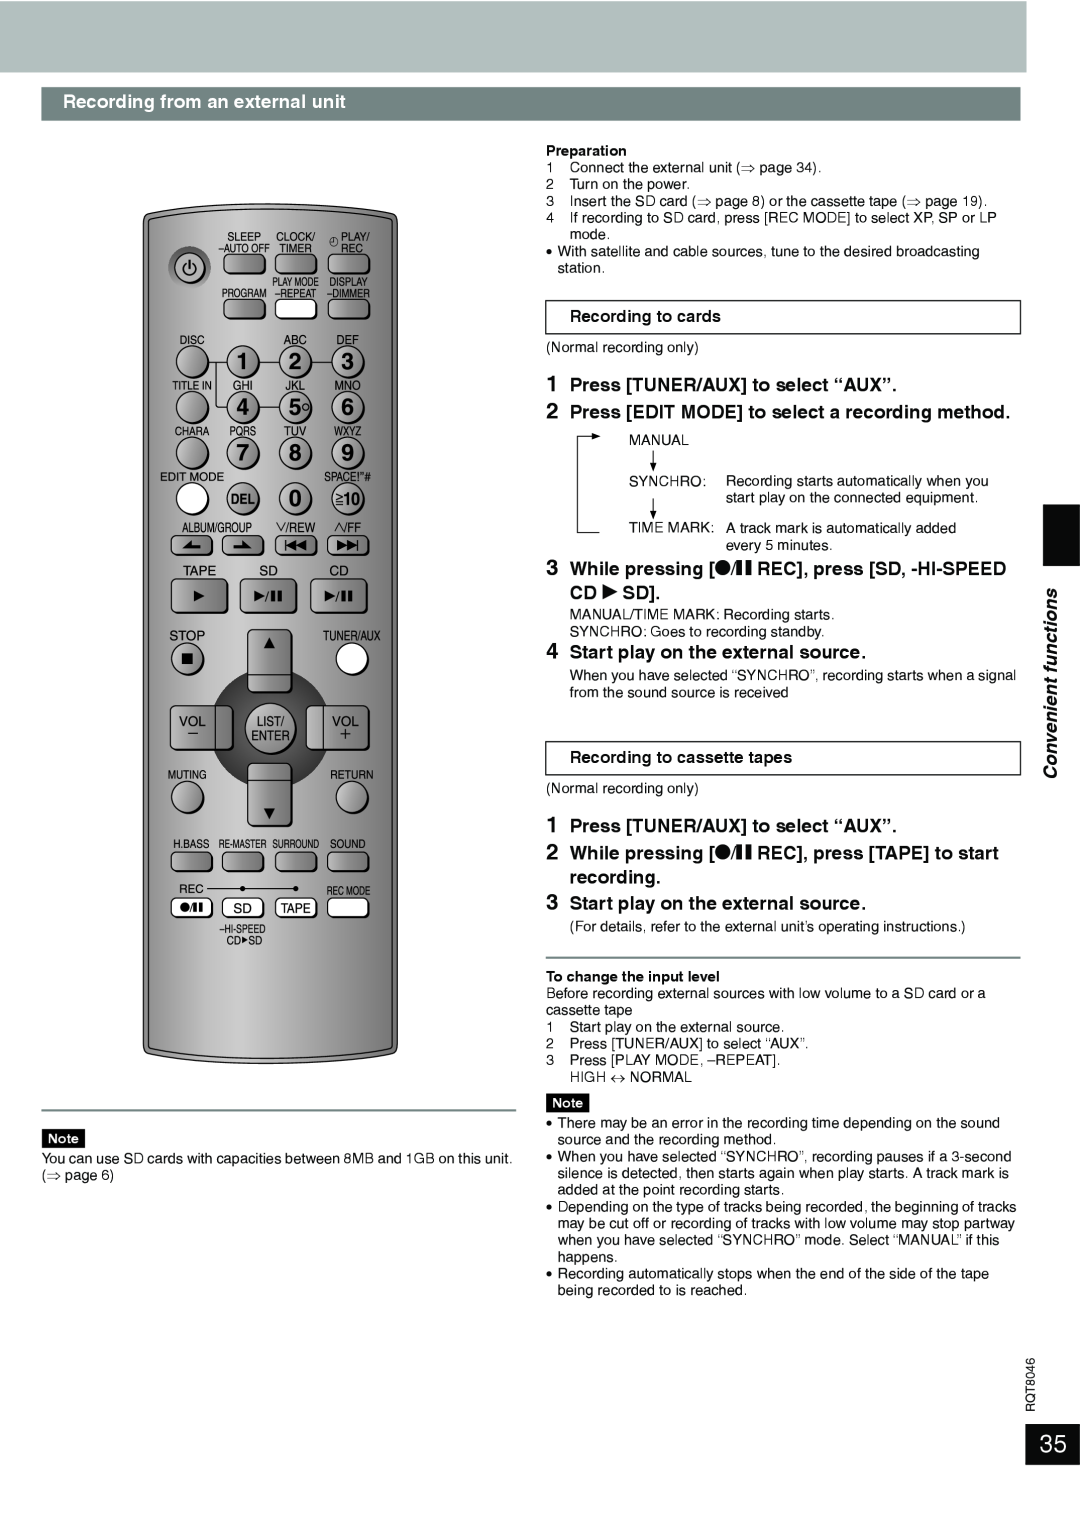 Panasonic SC-PM71SD manual Recording from an external unit, 1Press TUNER/AUX to select “AUX”, CD q SD, Recording to cards 